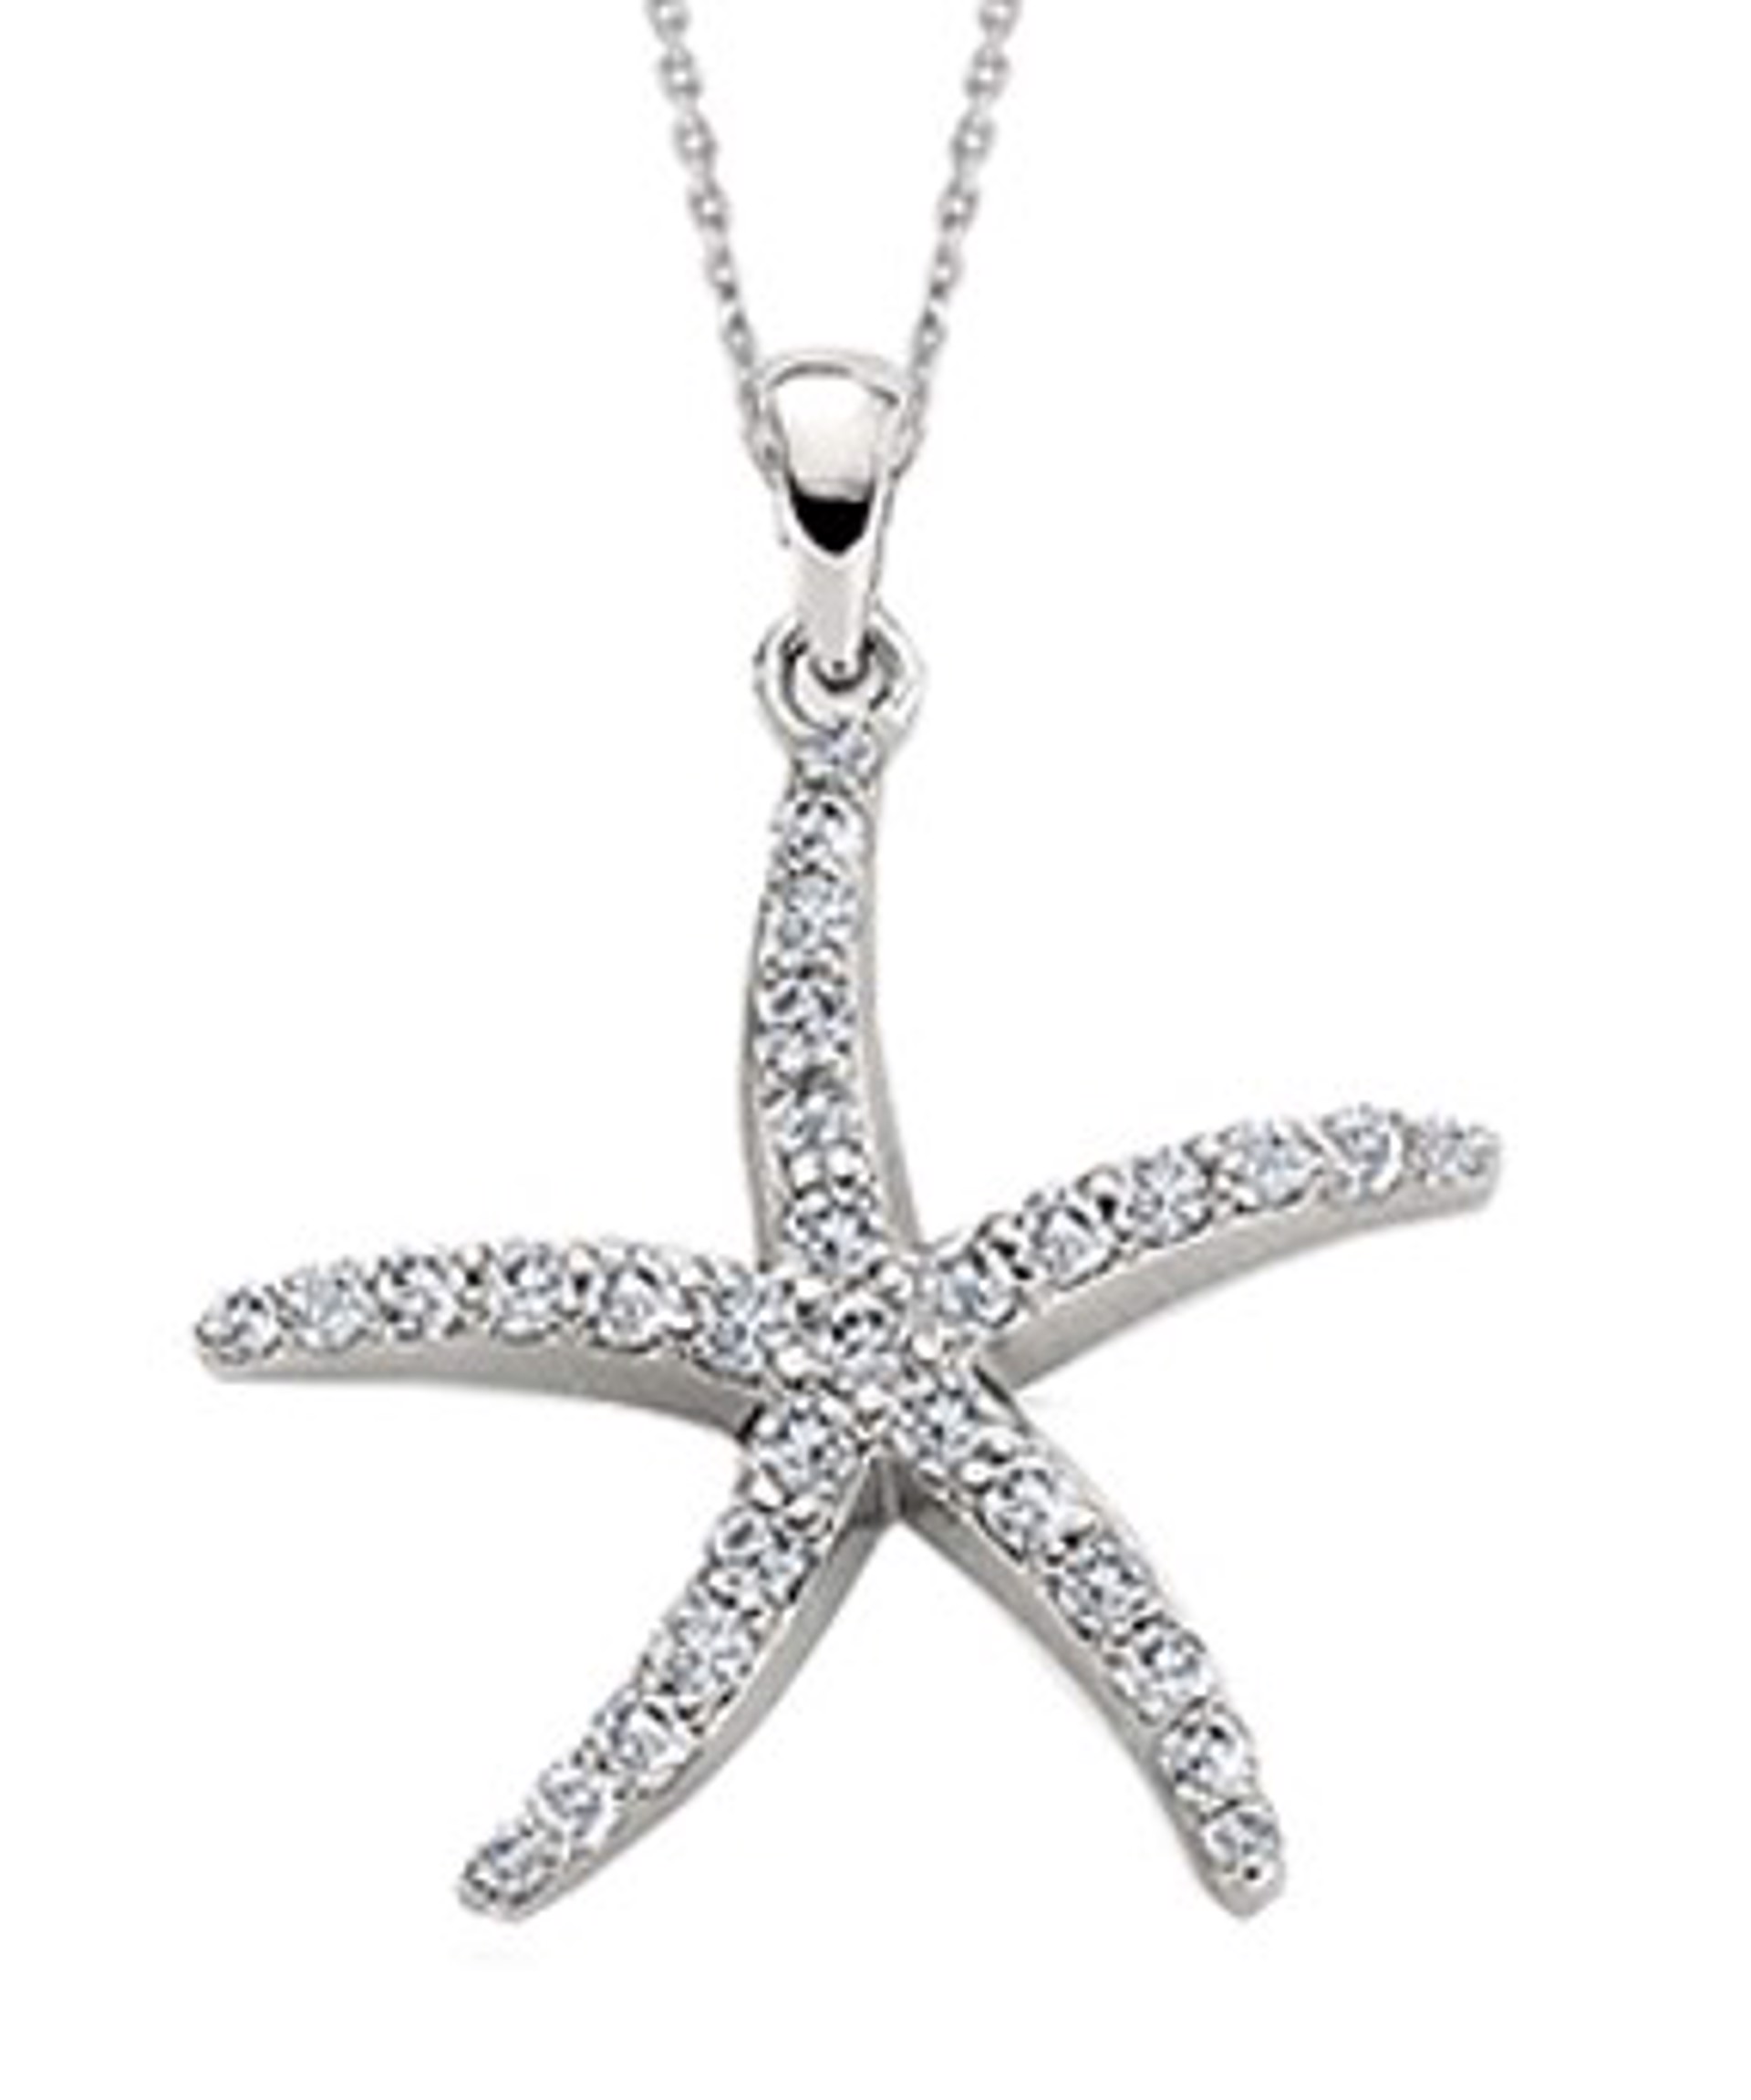 Starfish Necklace, 1/4 ct by Sharon Amber